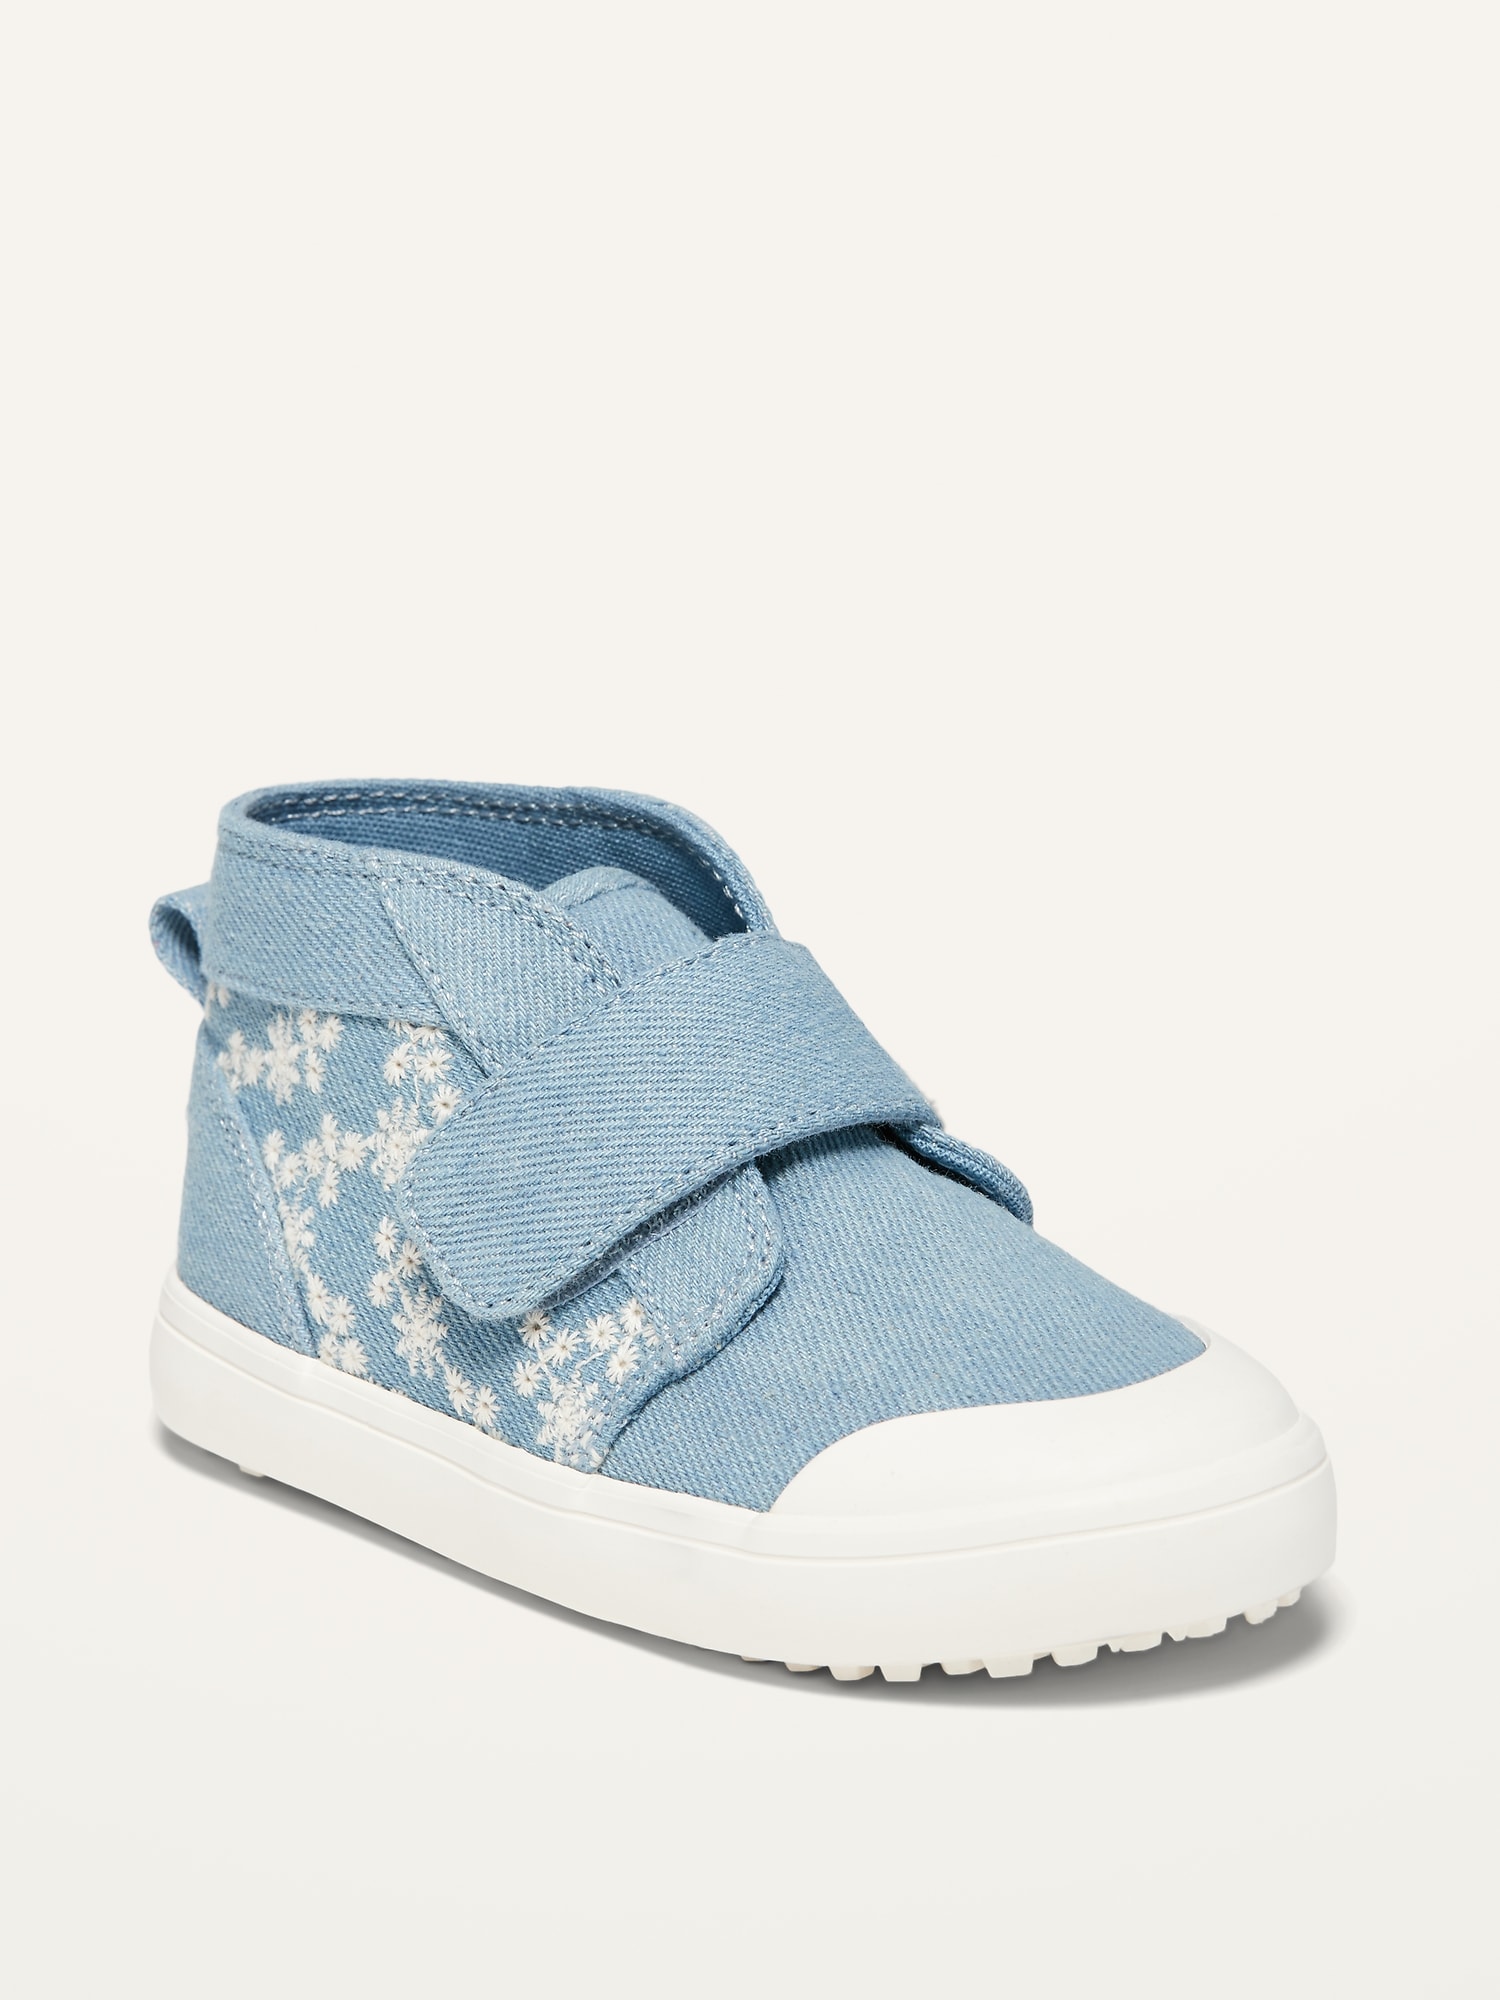 Unisex Mid-Top Chambray Chukka Sneakers for Toddler